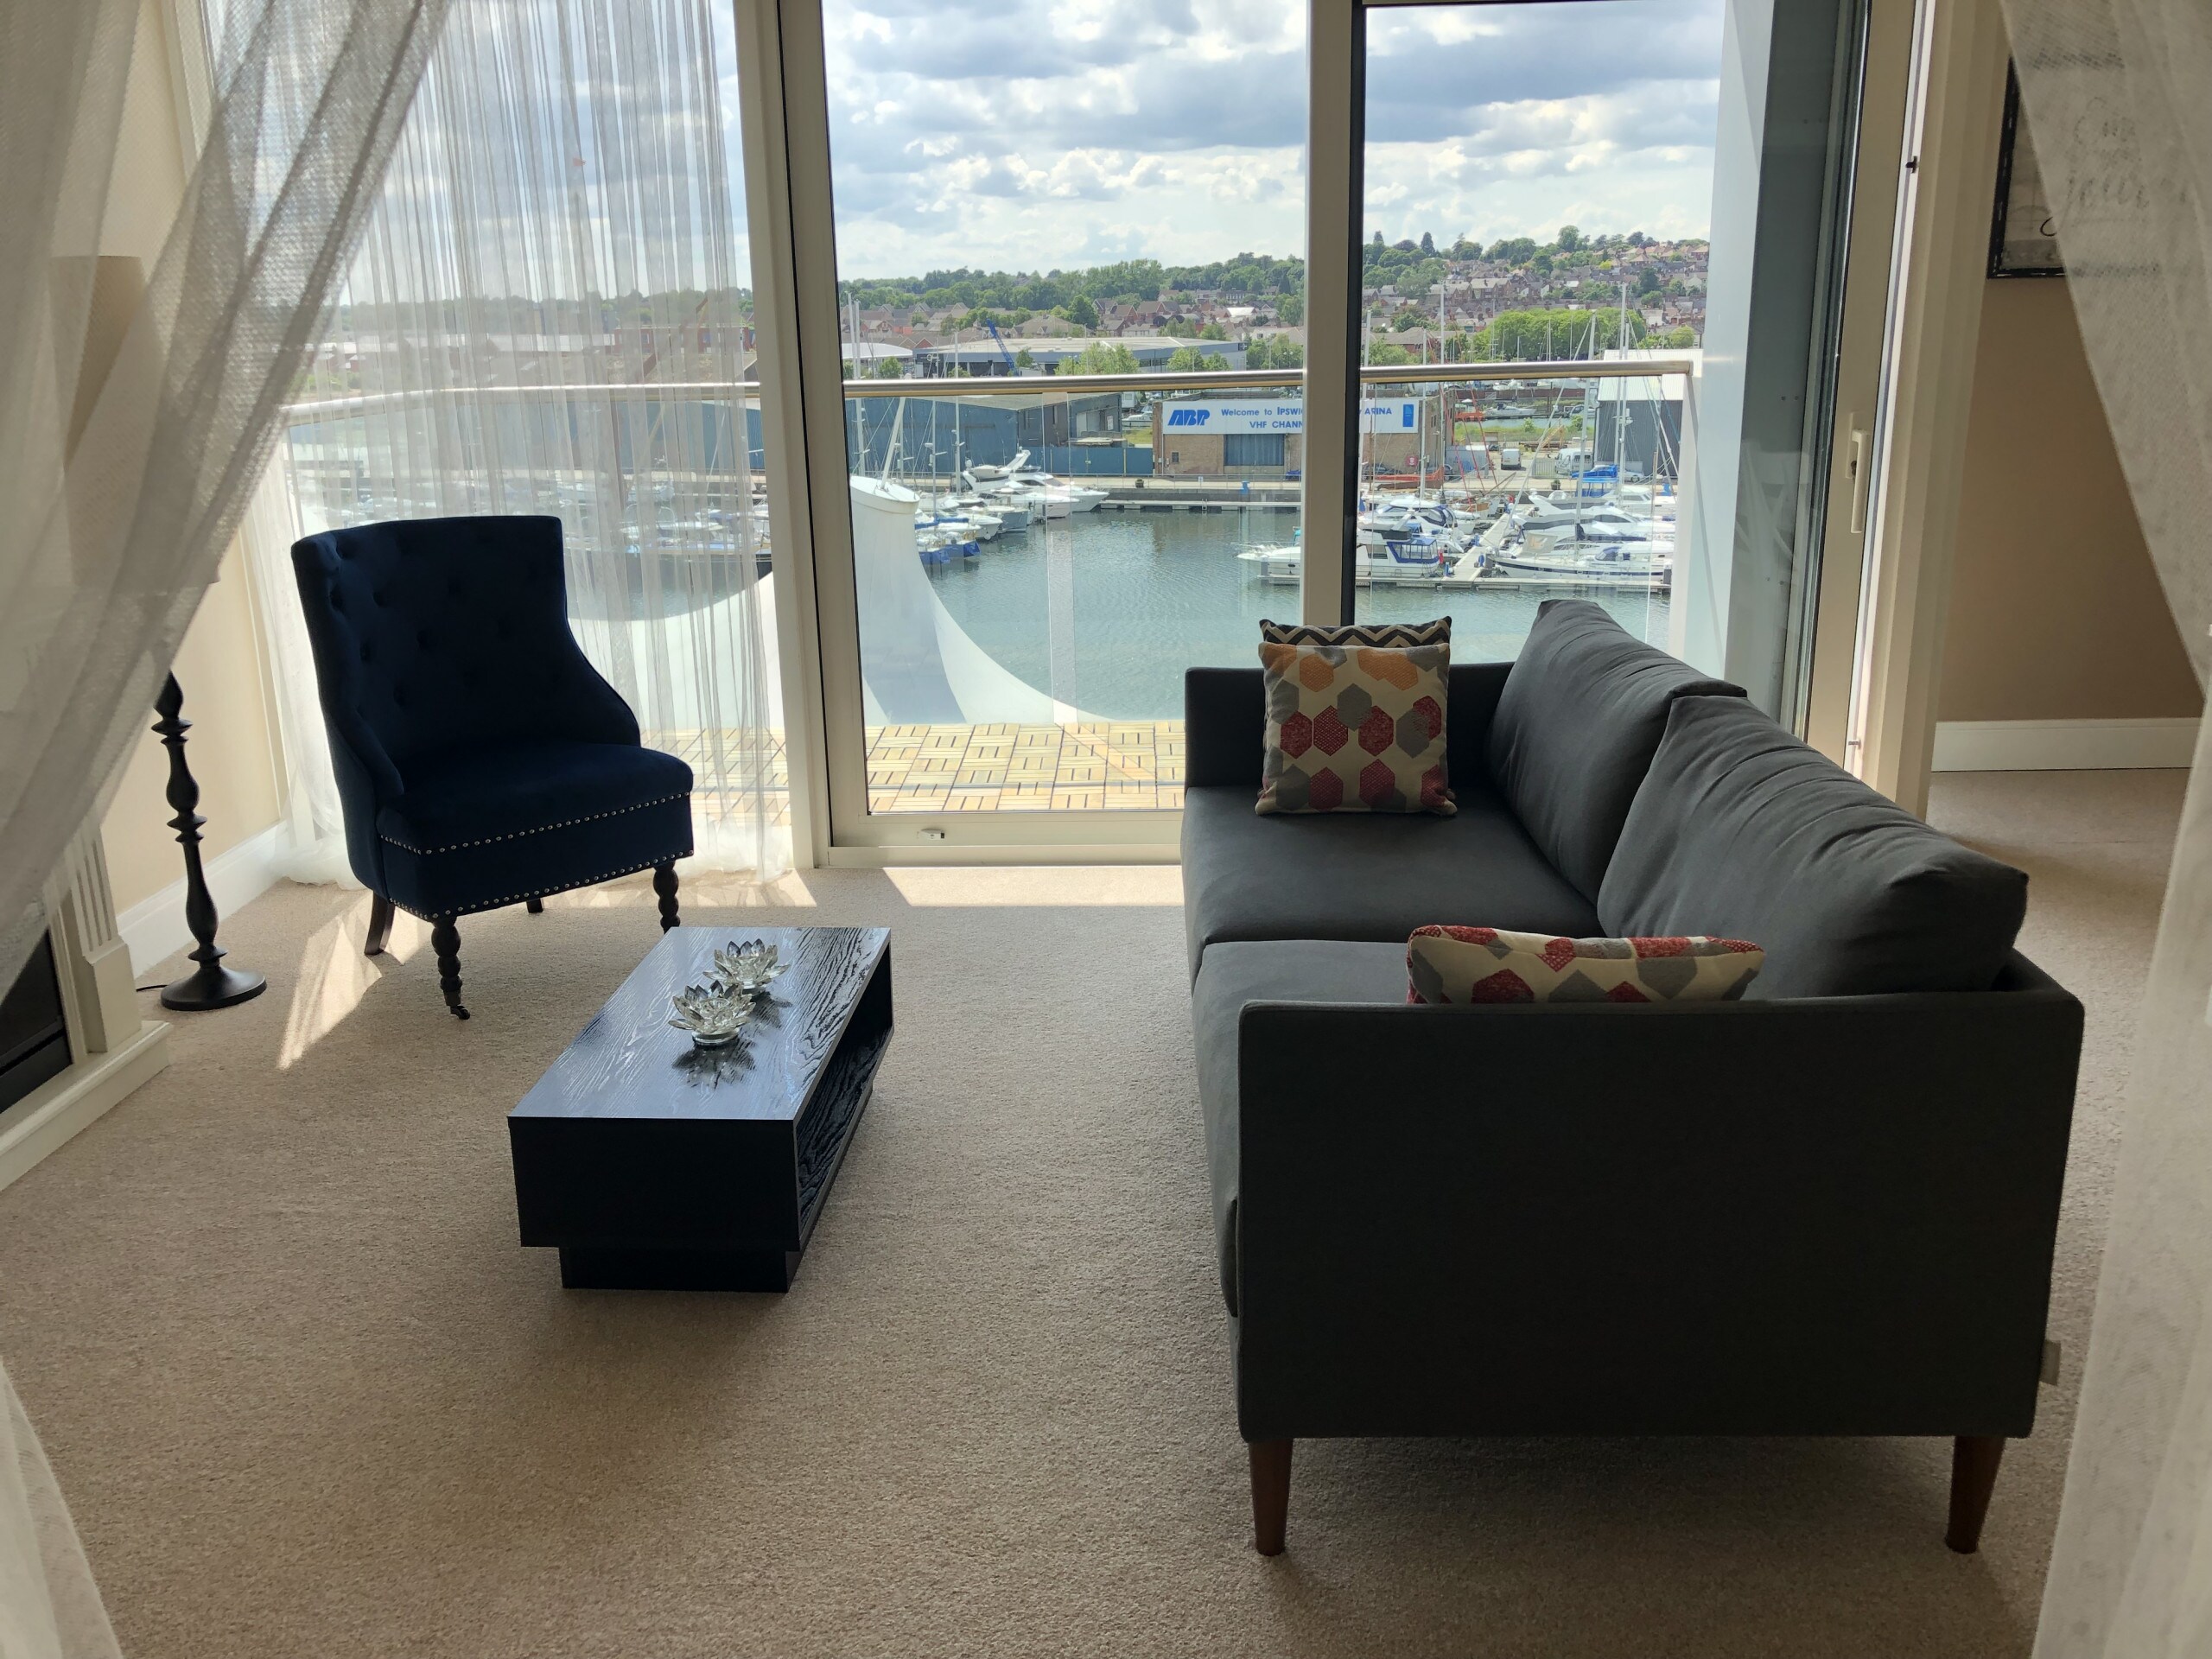 Property Image 2 - 2 Bedroom / 2 Bathroom, Ipswich Waterfront with balcony and marina views. Allocated parking space (indoor)